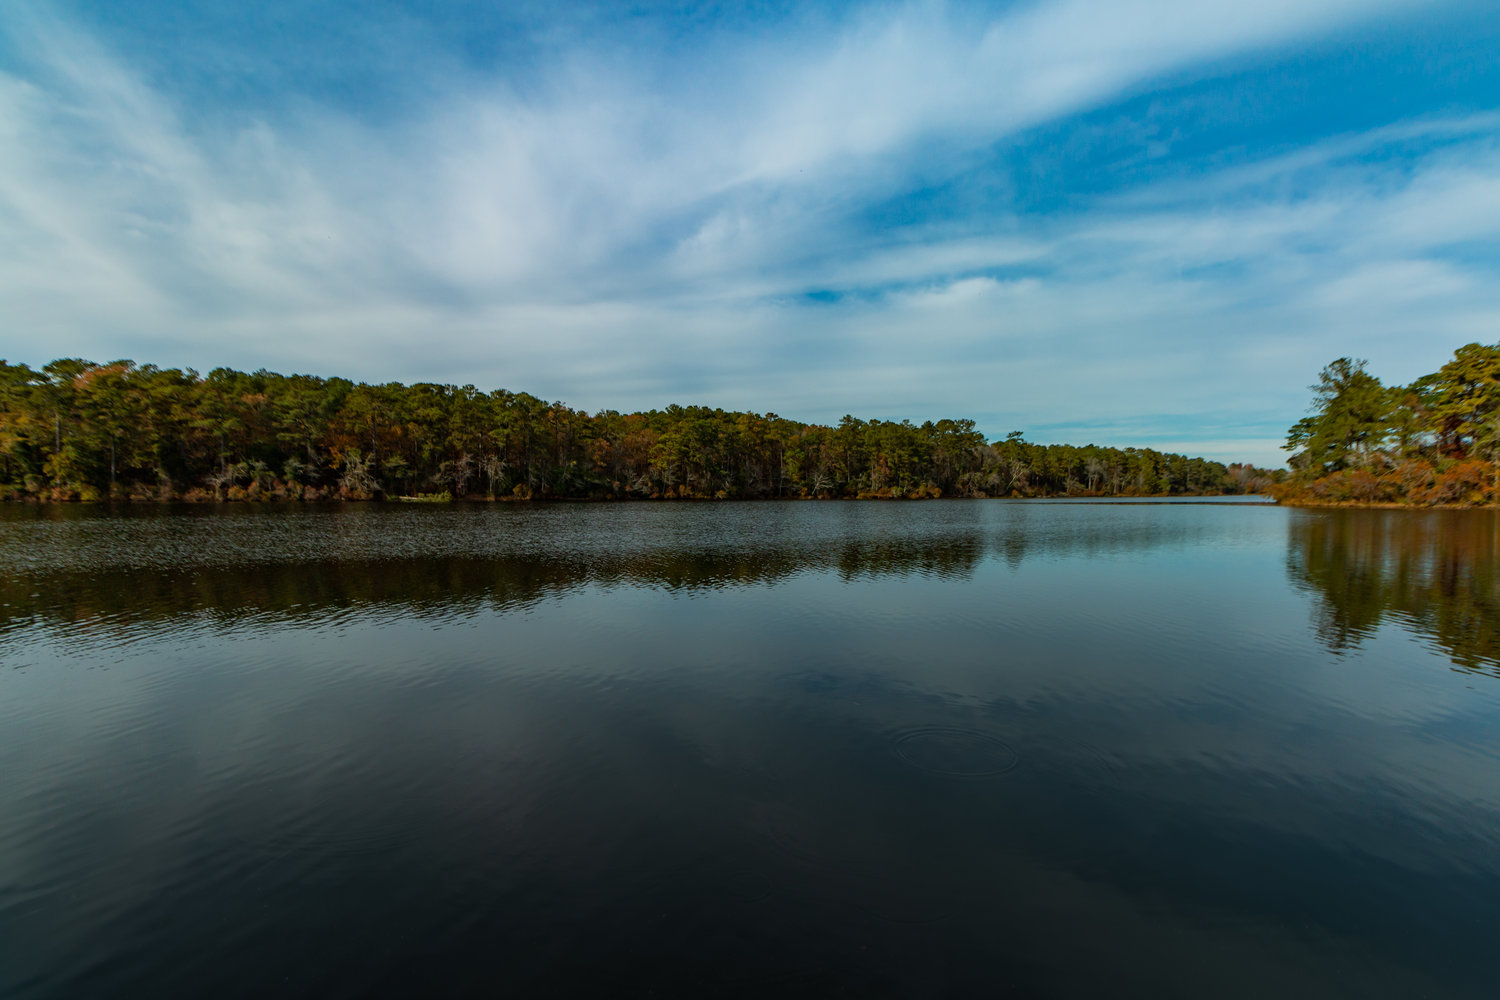 A view of Lake Rim from the fishing pier.